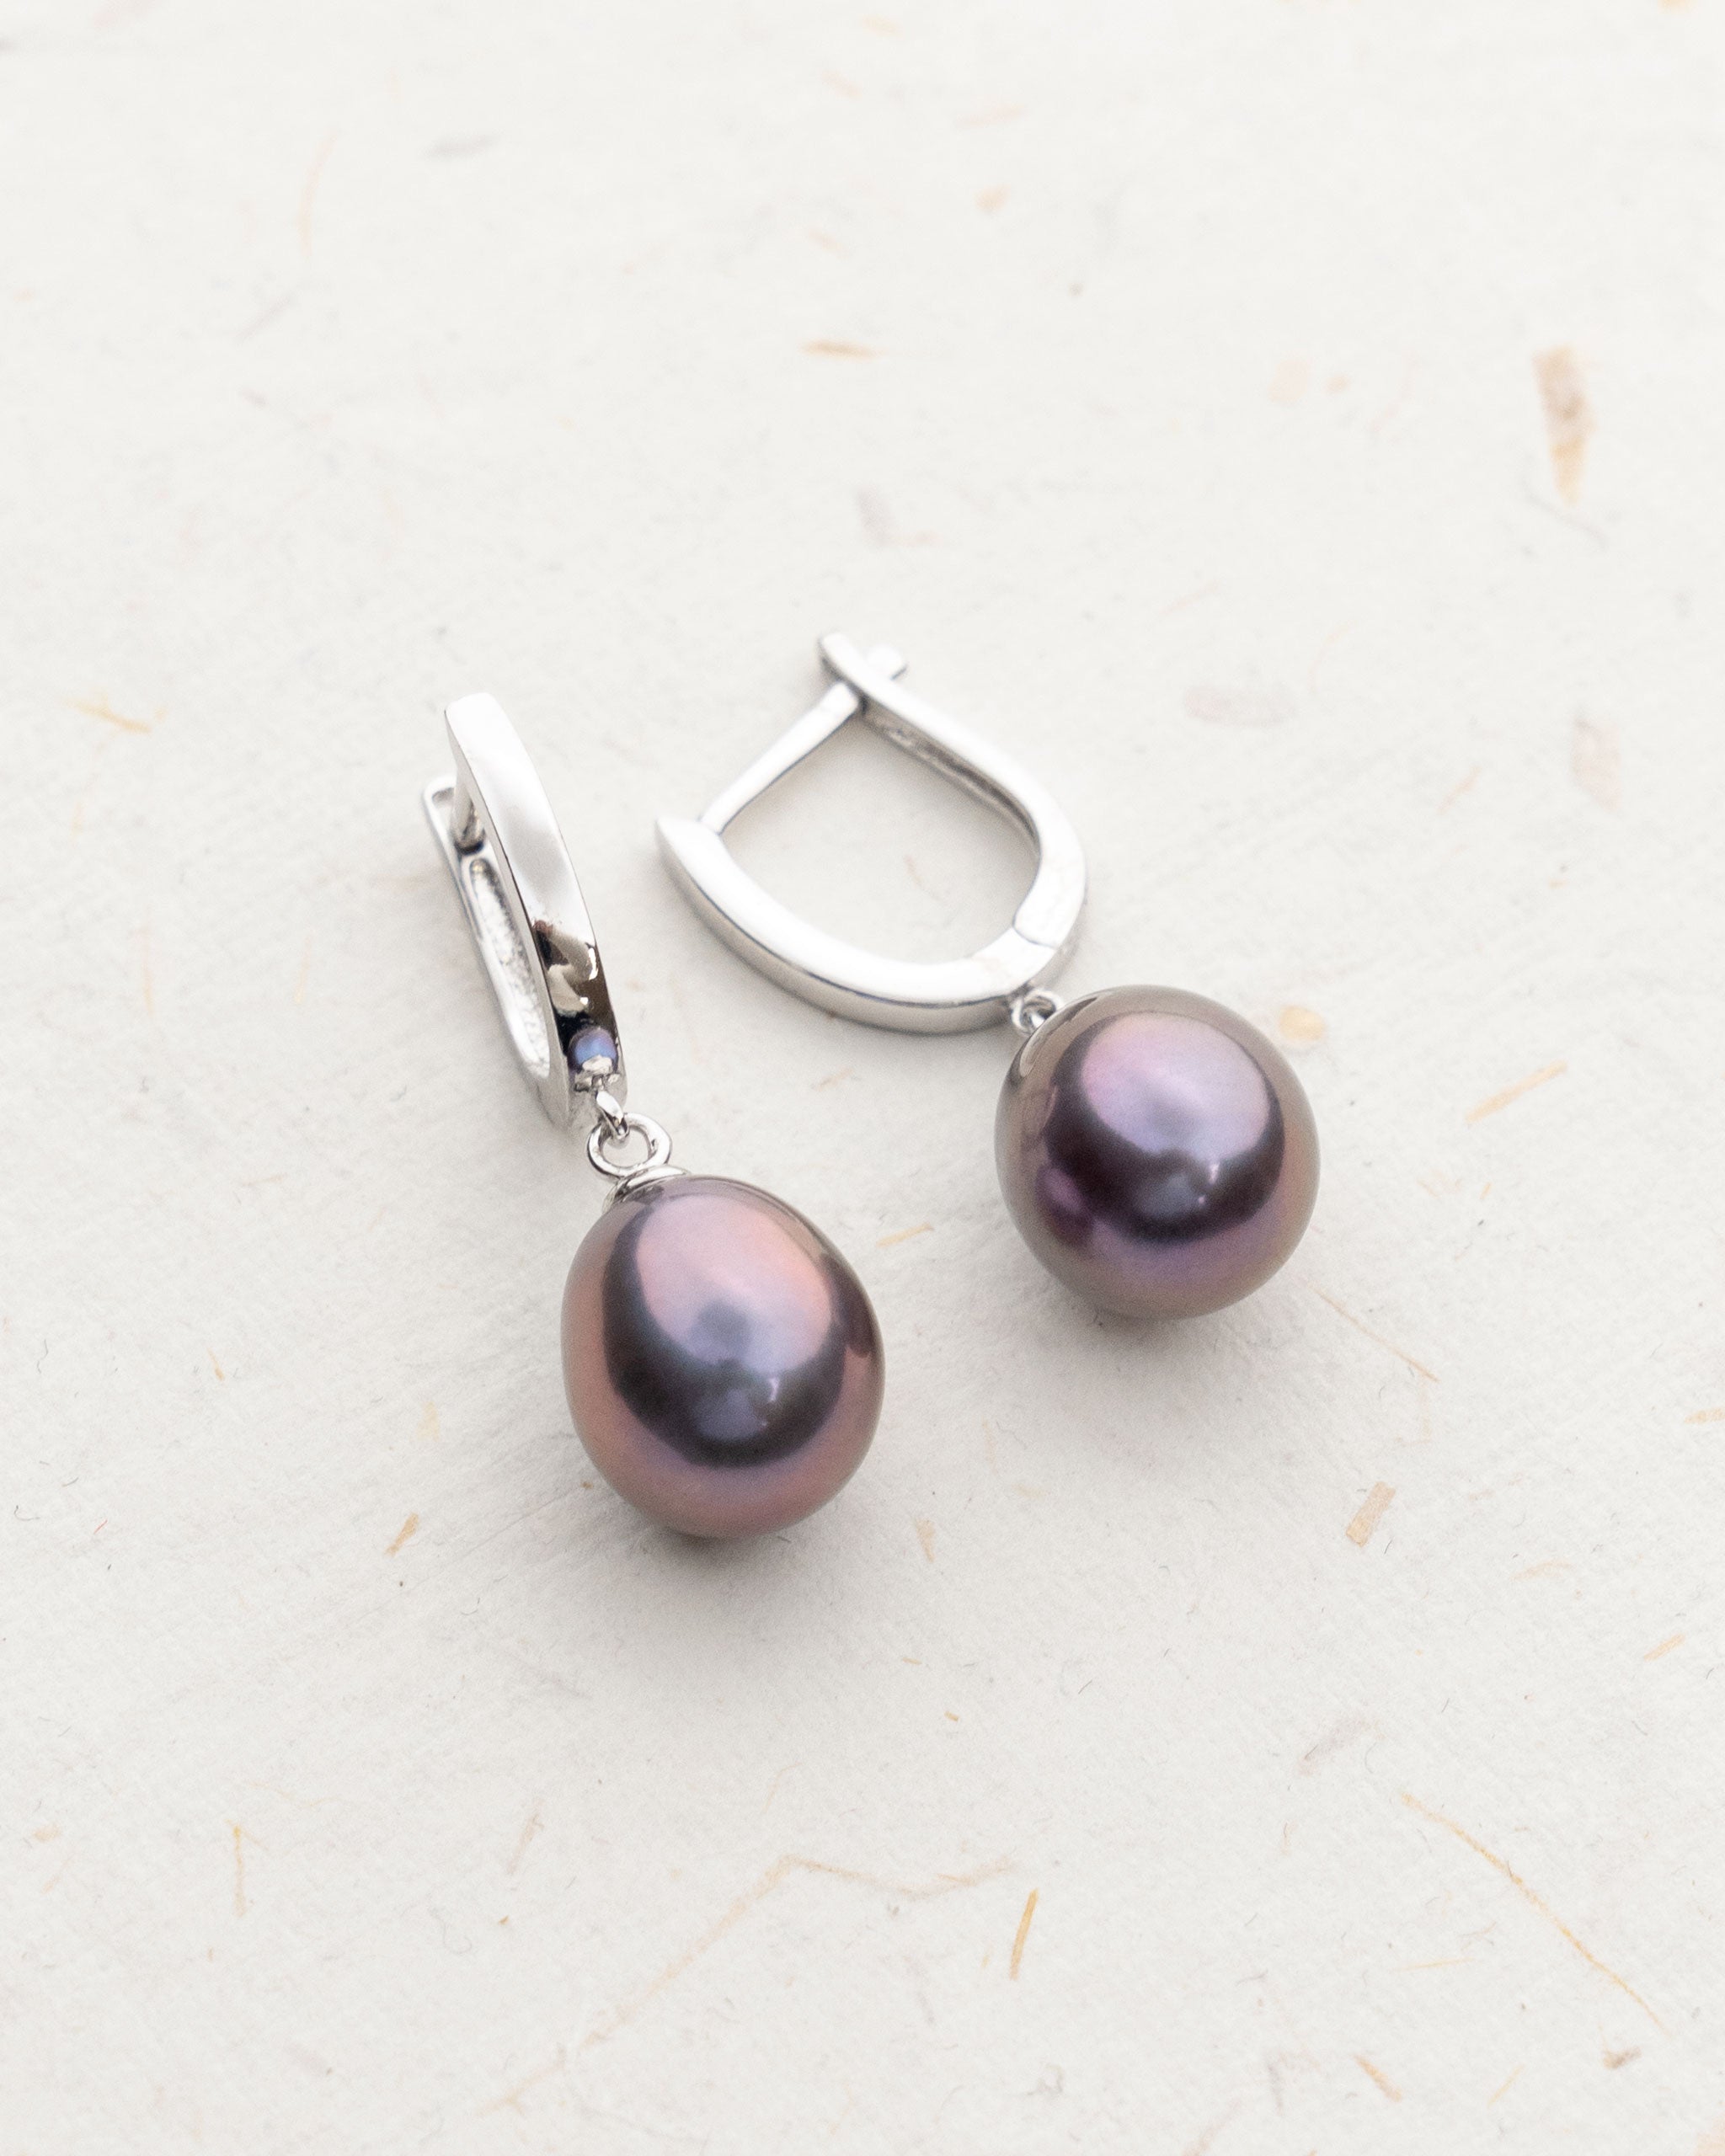 Freshwater Pearl Earrings 10-11mm Drop type Black color with Sterling Silver